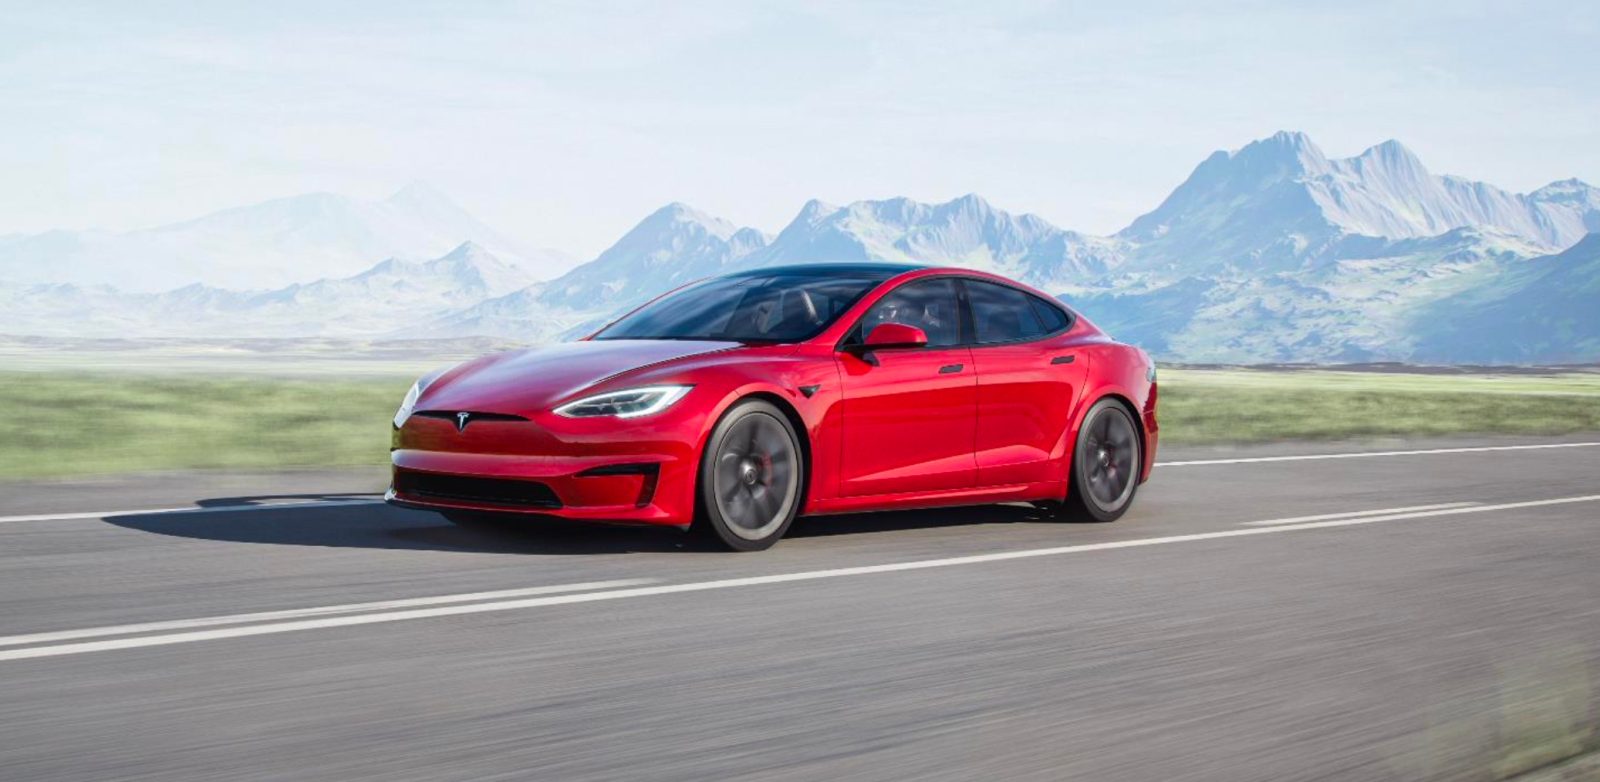 Tesla Model S Plaid quickest car ever, sets stage for even more